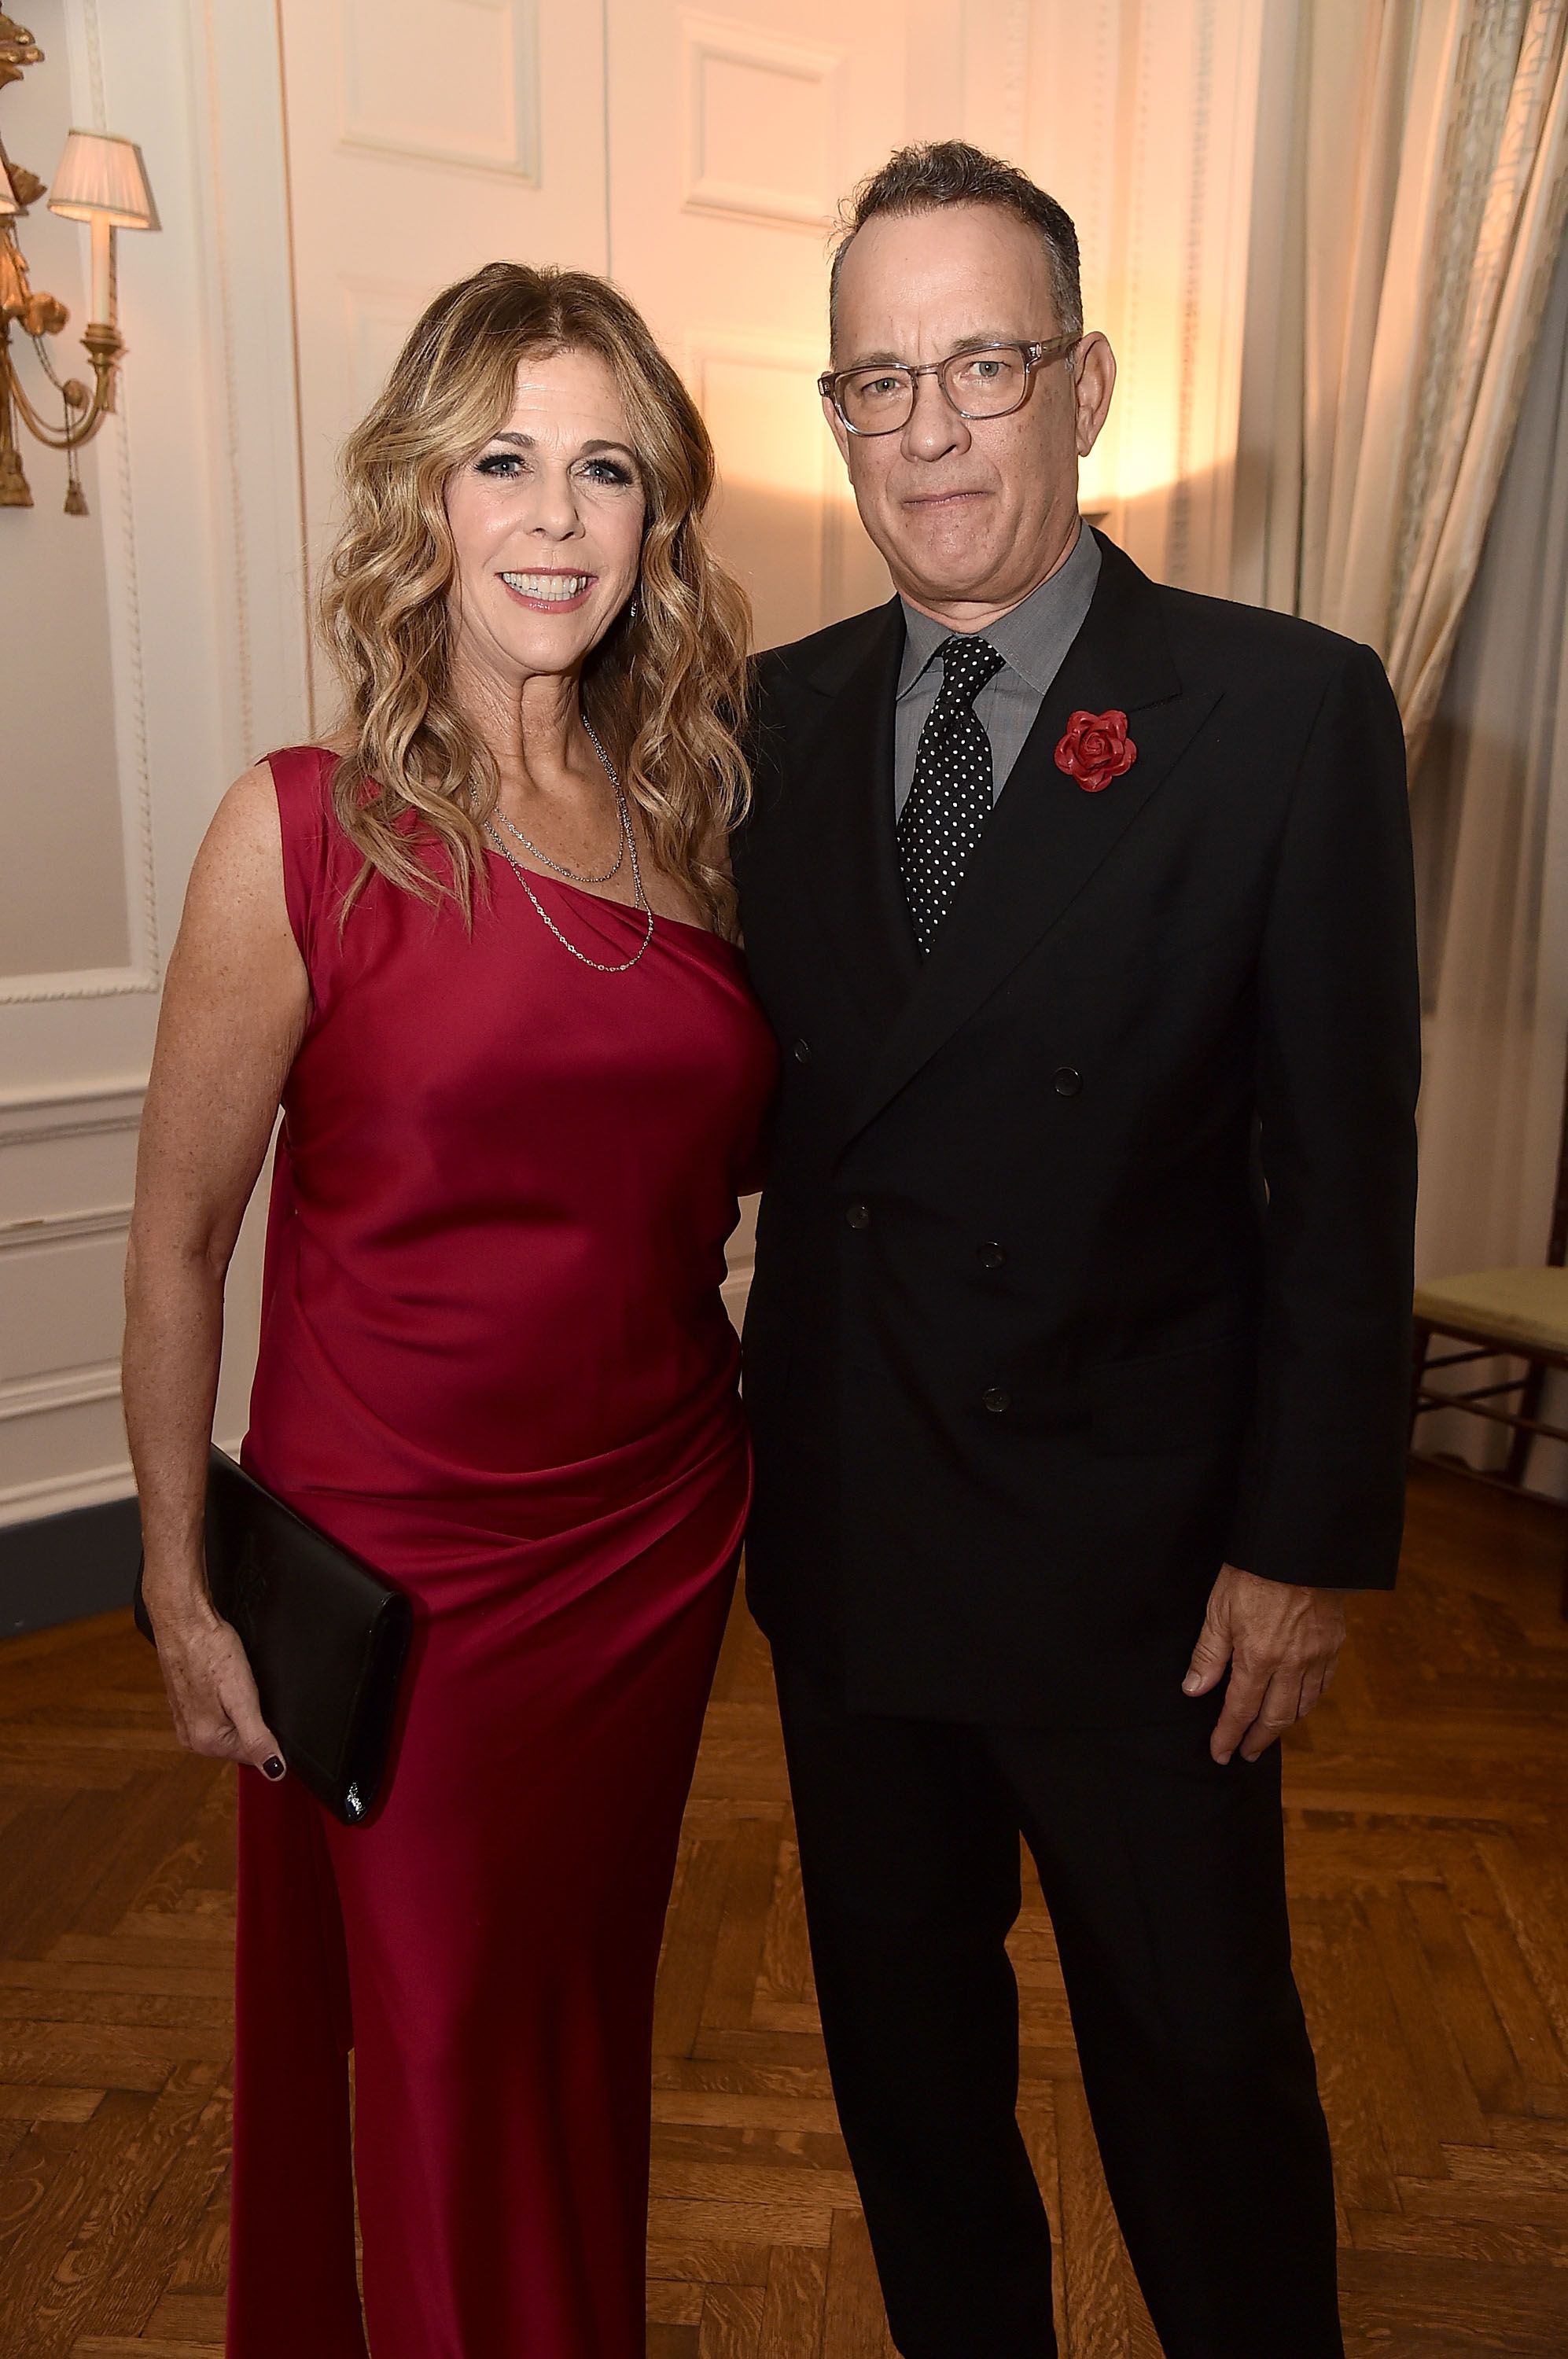 Rita Wilson and Tom Hanks at the American Friends of Blerancourt Dinner at Colony Club on November 9, 2018 | Source: Getty Images